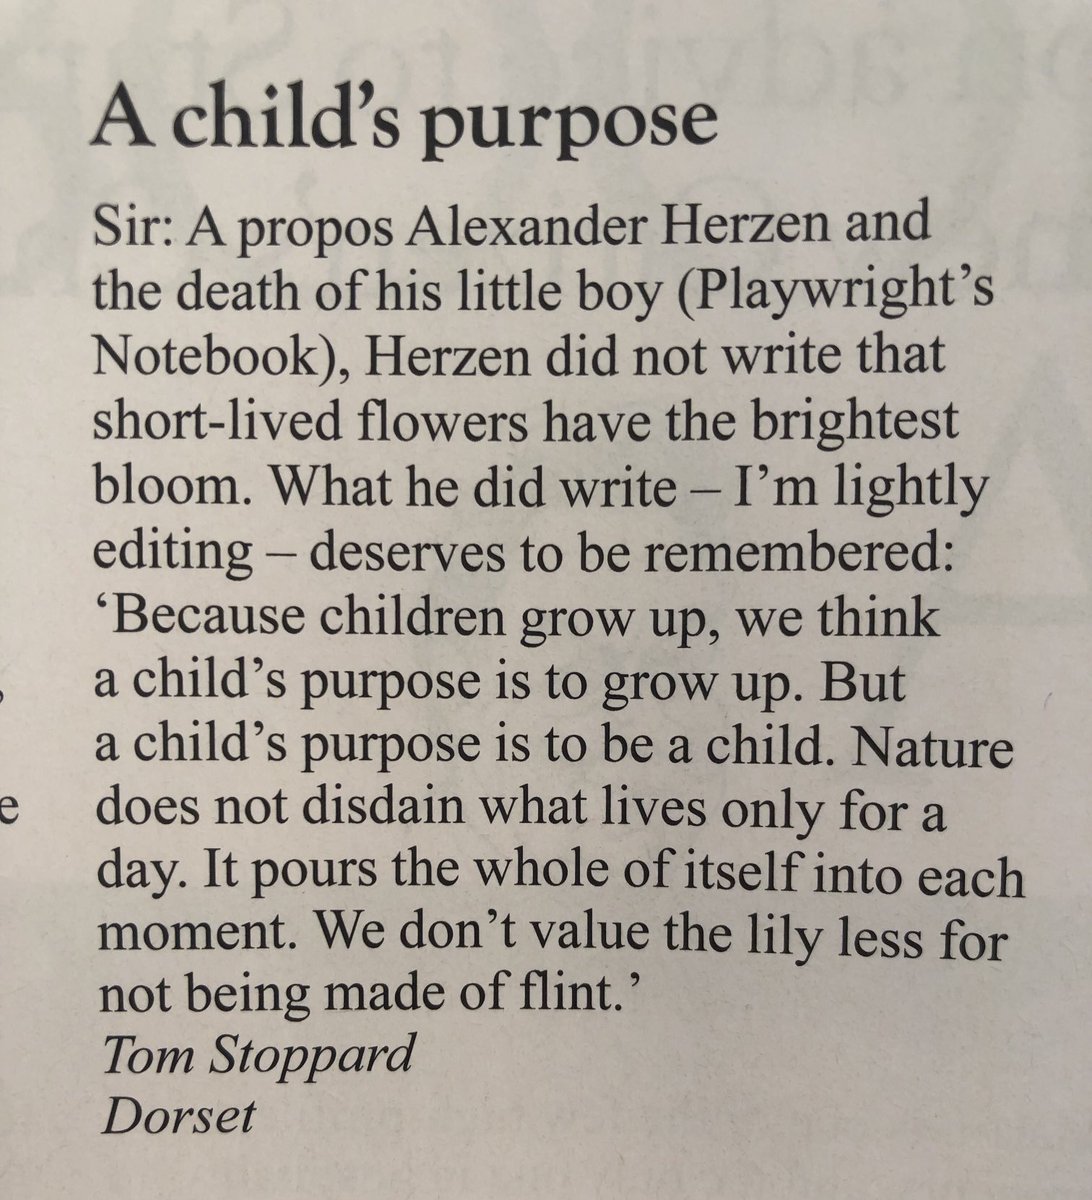 A letter from Tom Stoppard. Exquisite.